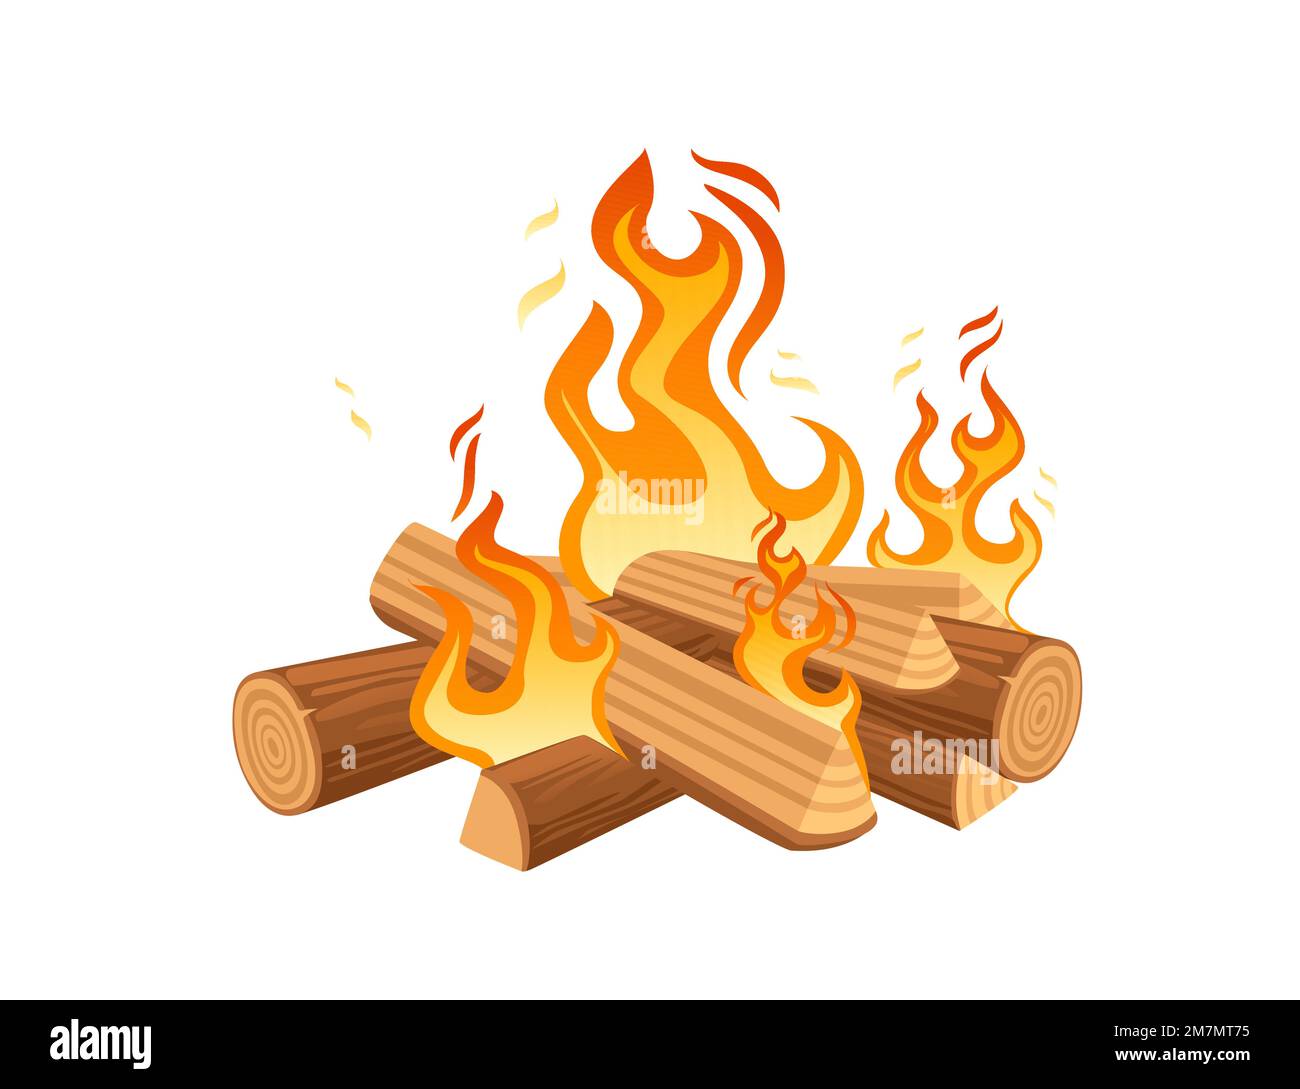 Bonfire with burning wood and flame vector illustration isolated on white background Stock Vector